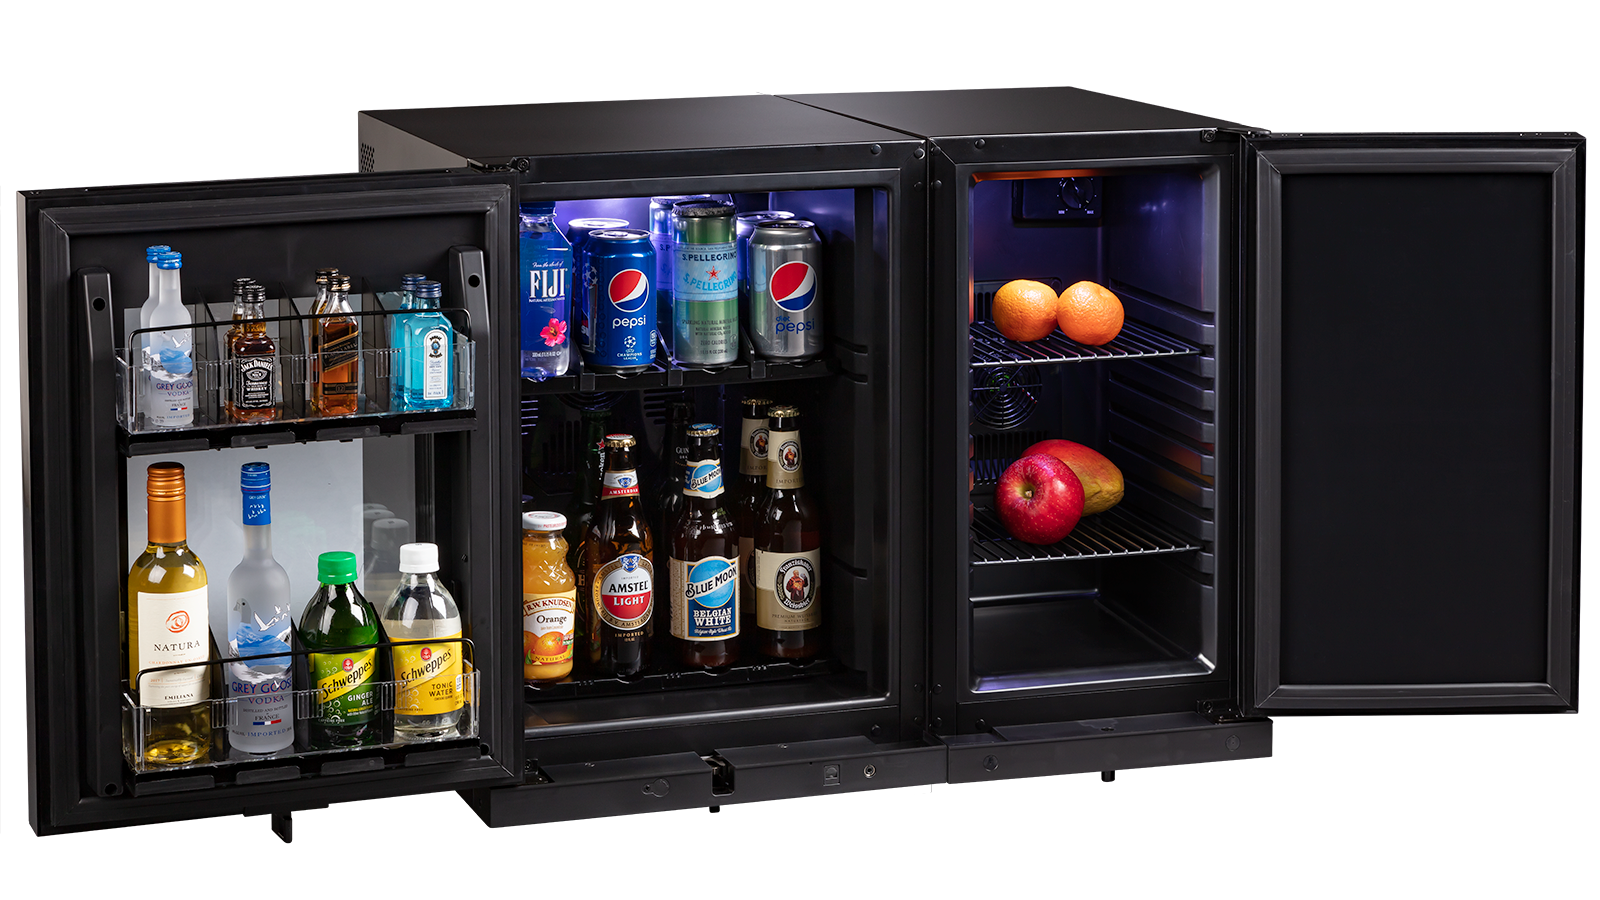 Are You Looking for The Next Generation Minibar Program With Guaranteed  Guest Satisfaction? – Hotel-Online